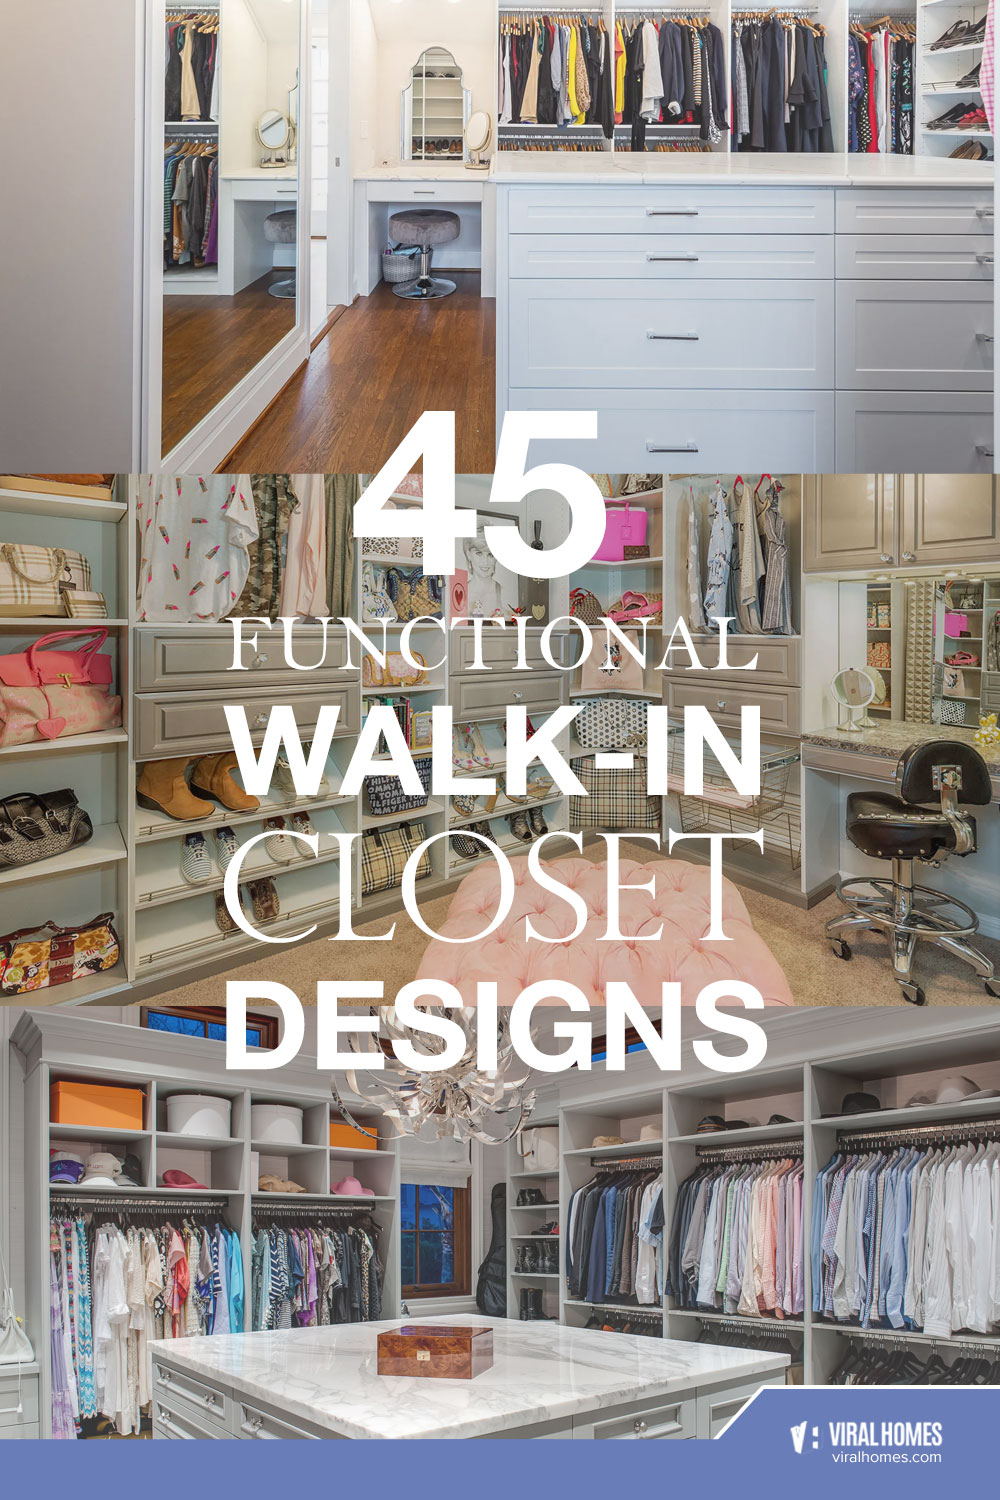 Functional Walk-In Closet Designs to Store Your Stuff